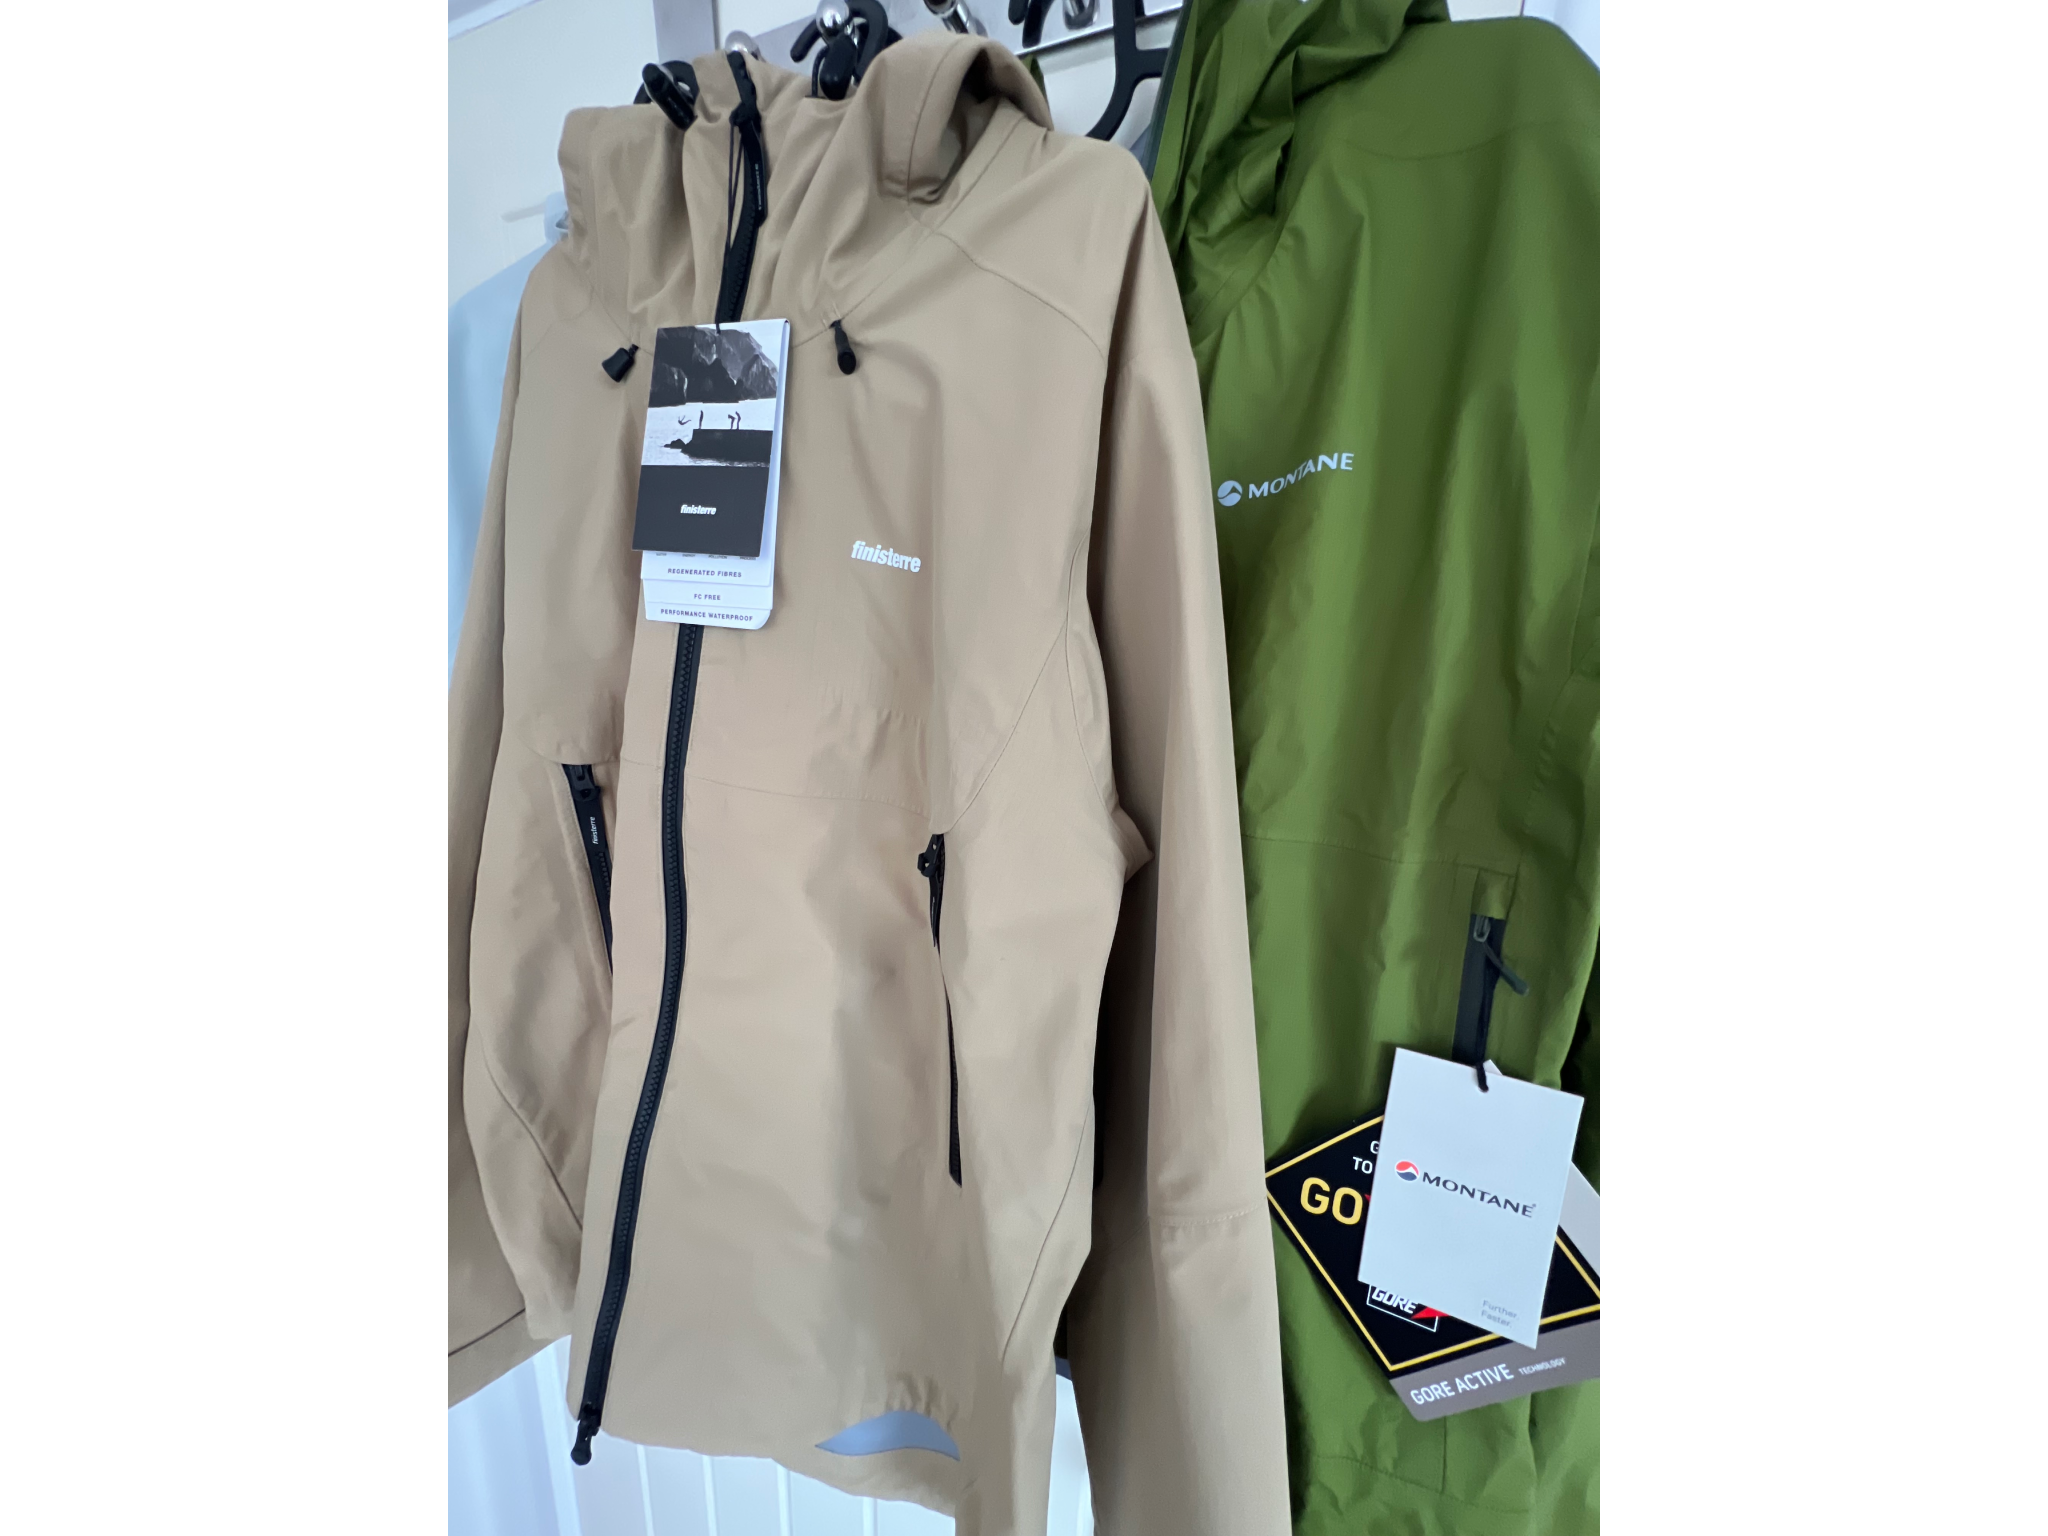 A selection of the waterproof jackets we tested for this review